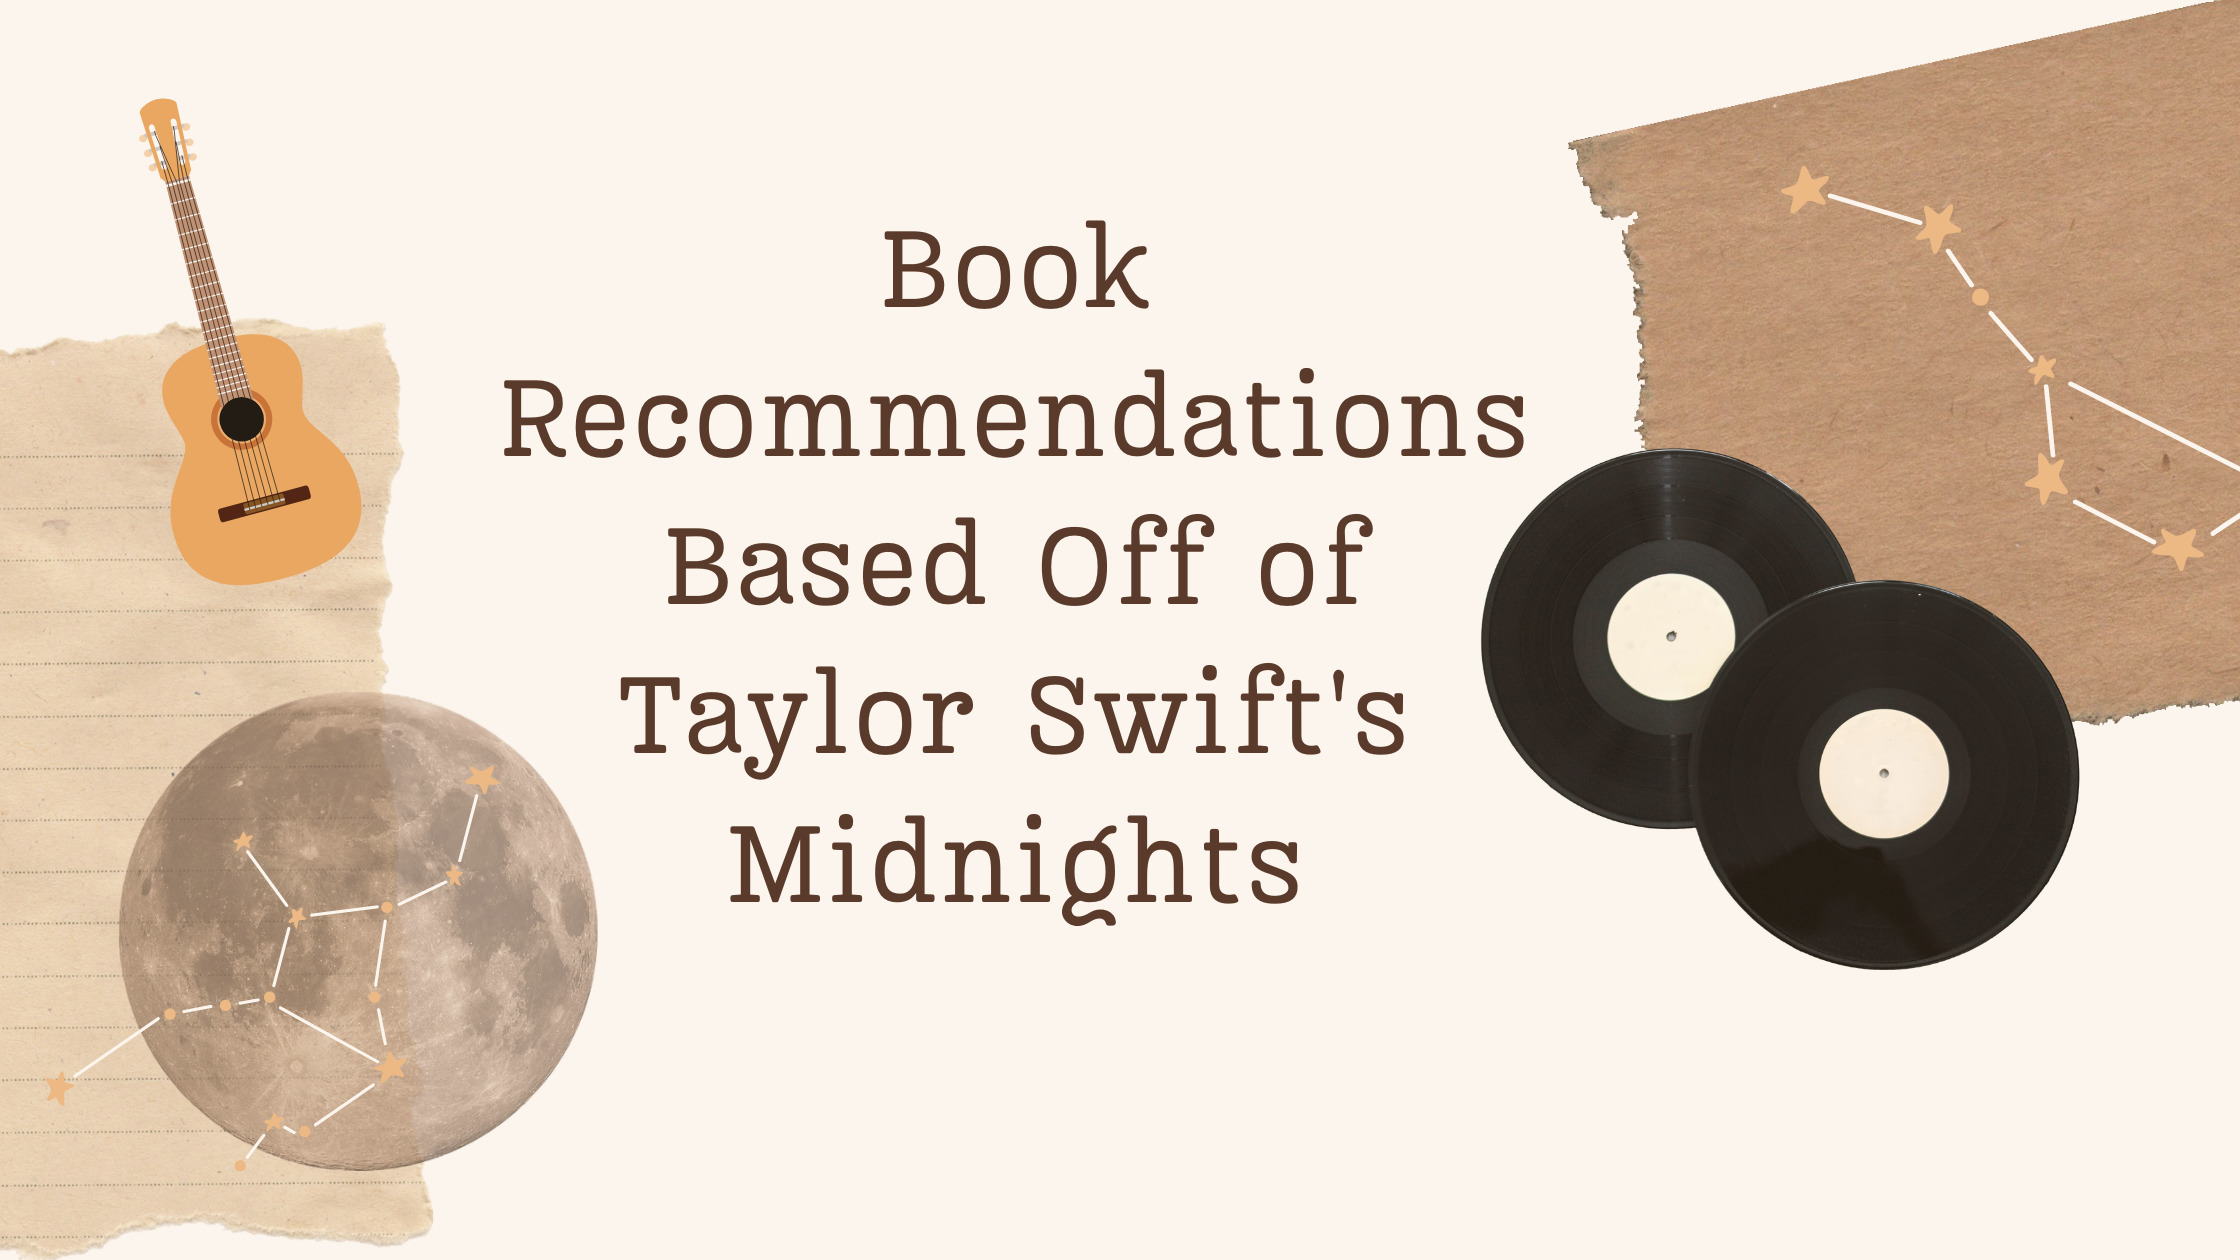 What You Should Read Based Off Your Favorite Song On “Midnights